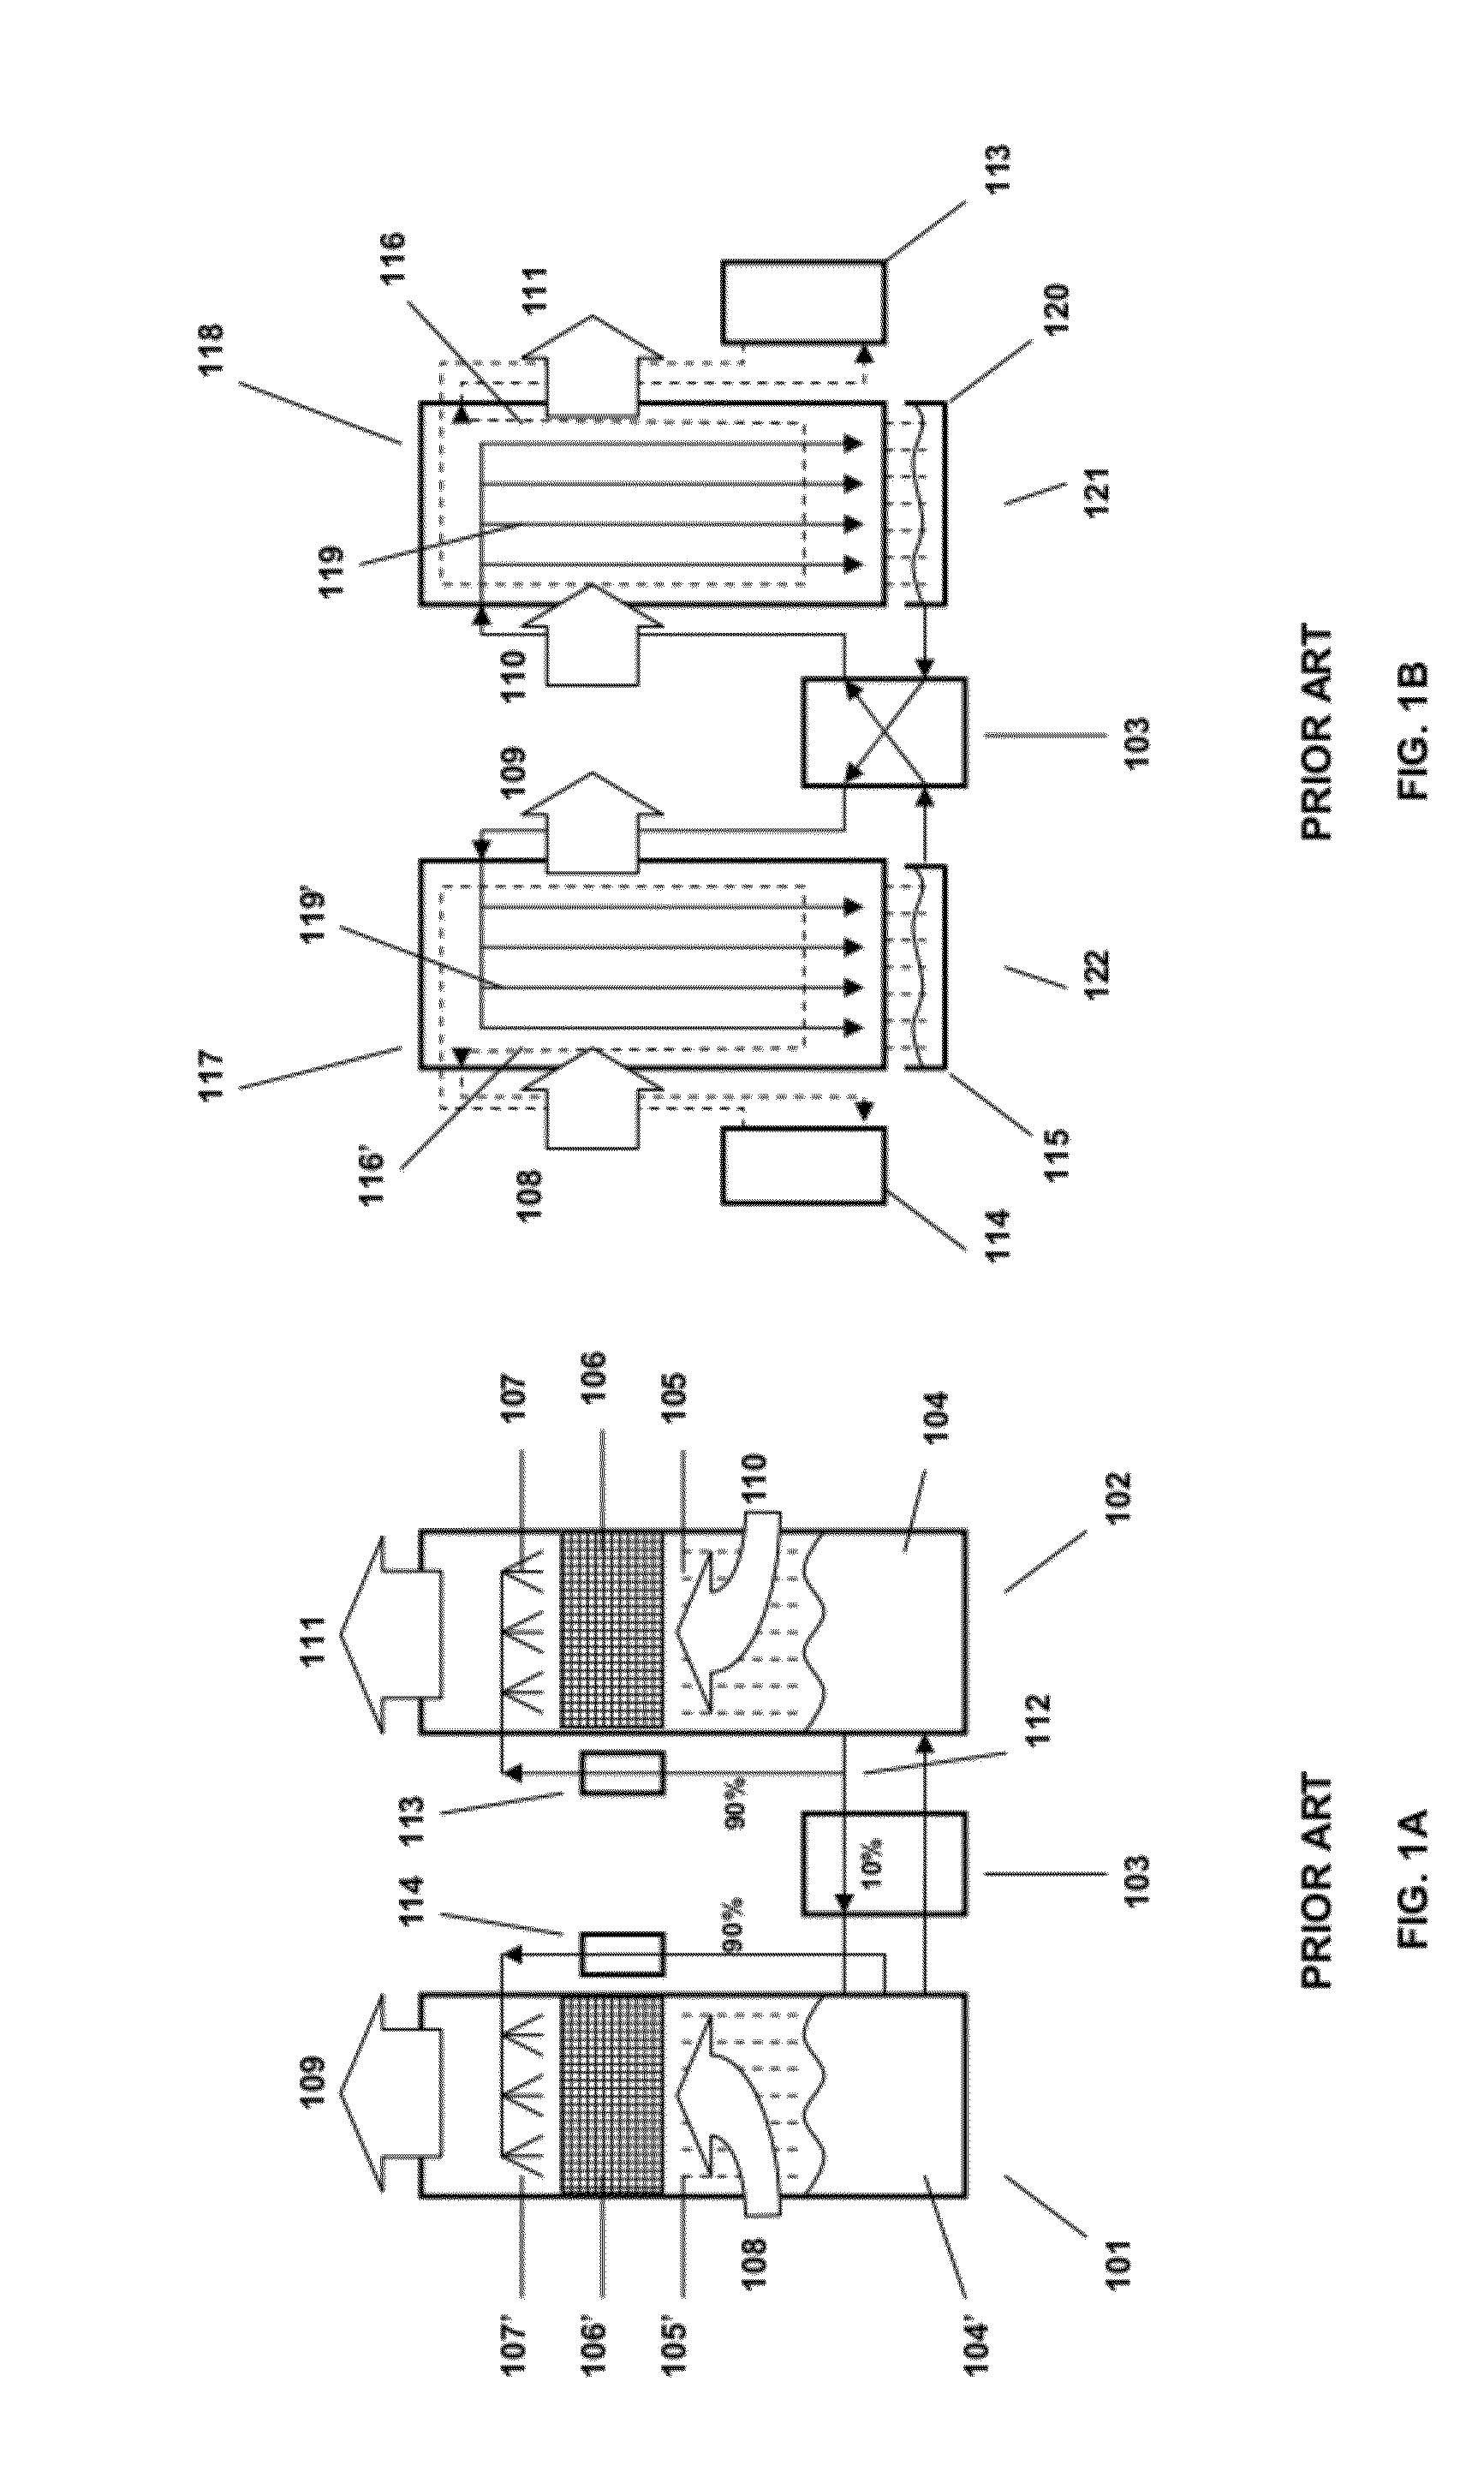 Methods and systems for desiccant air conditioning with combustion contaminant filtering